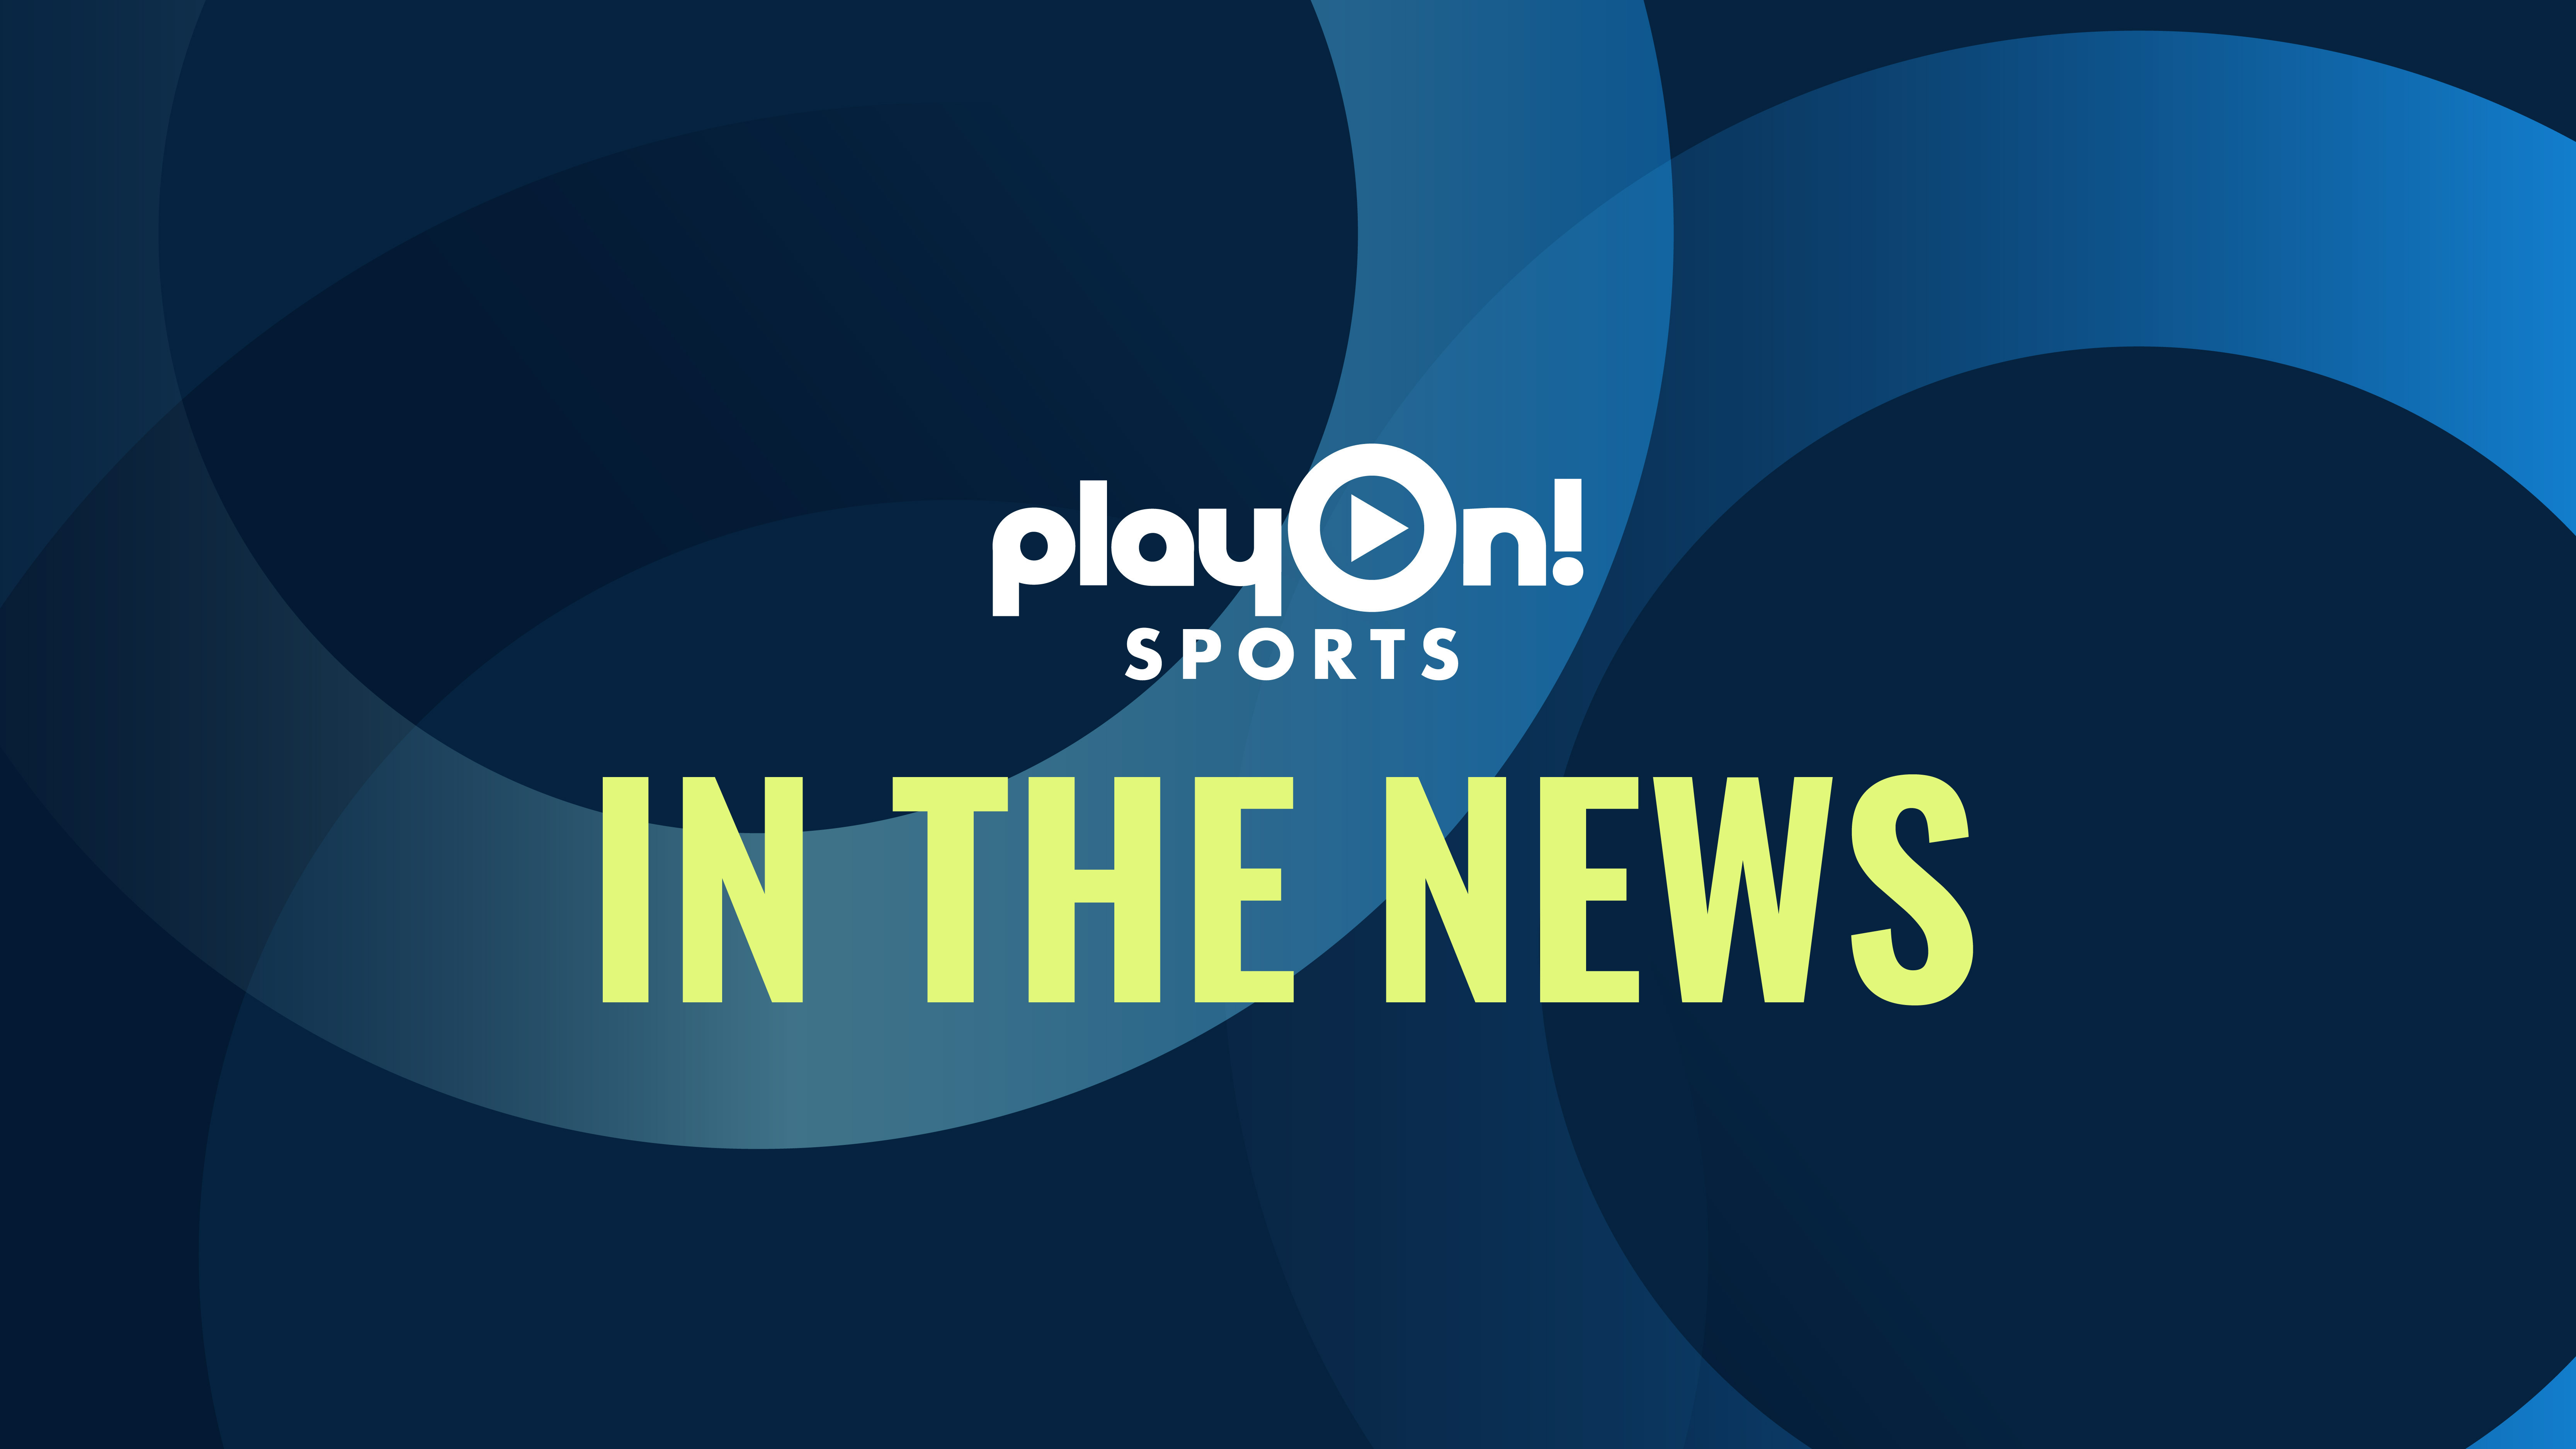 PlayOn! Sports is in the news